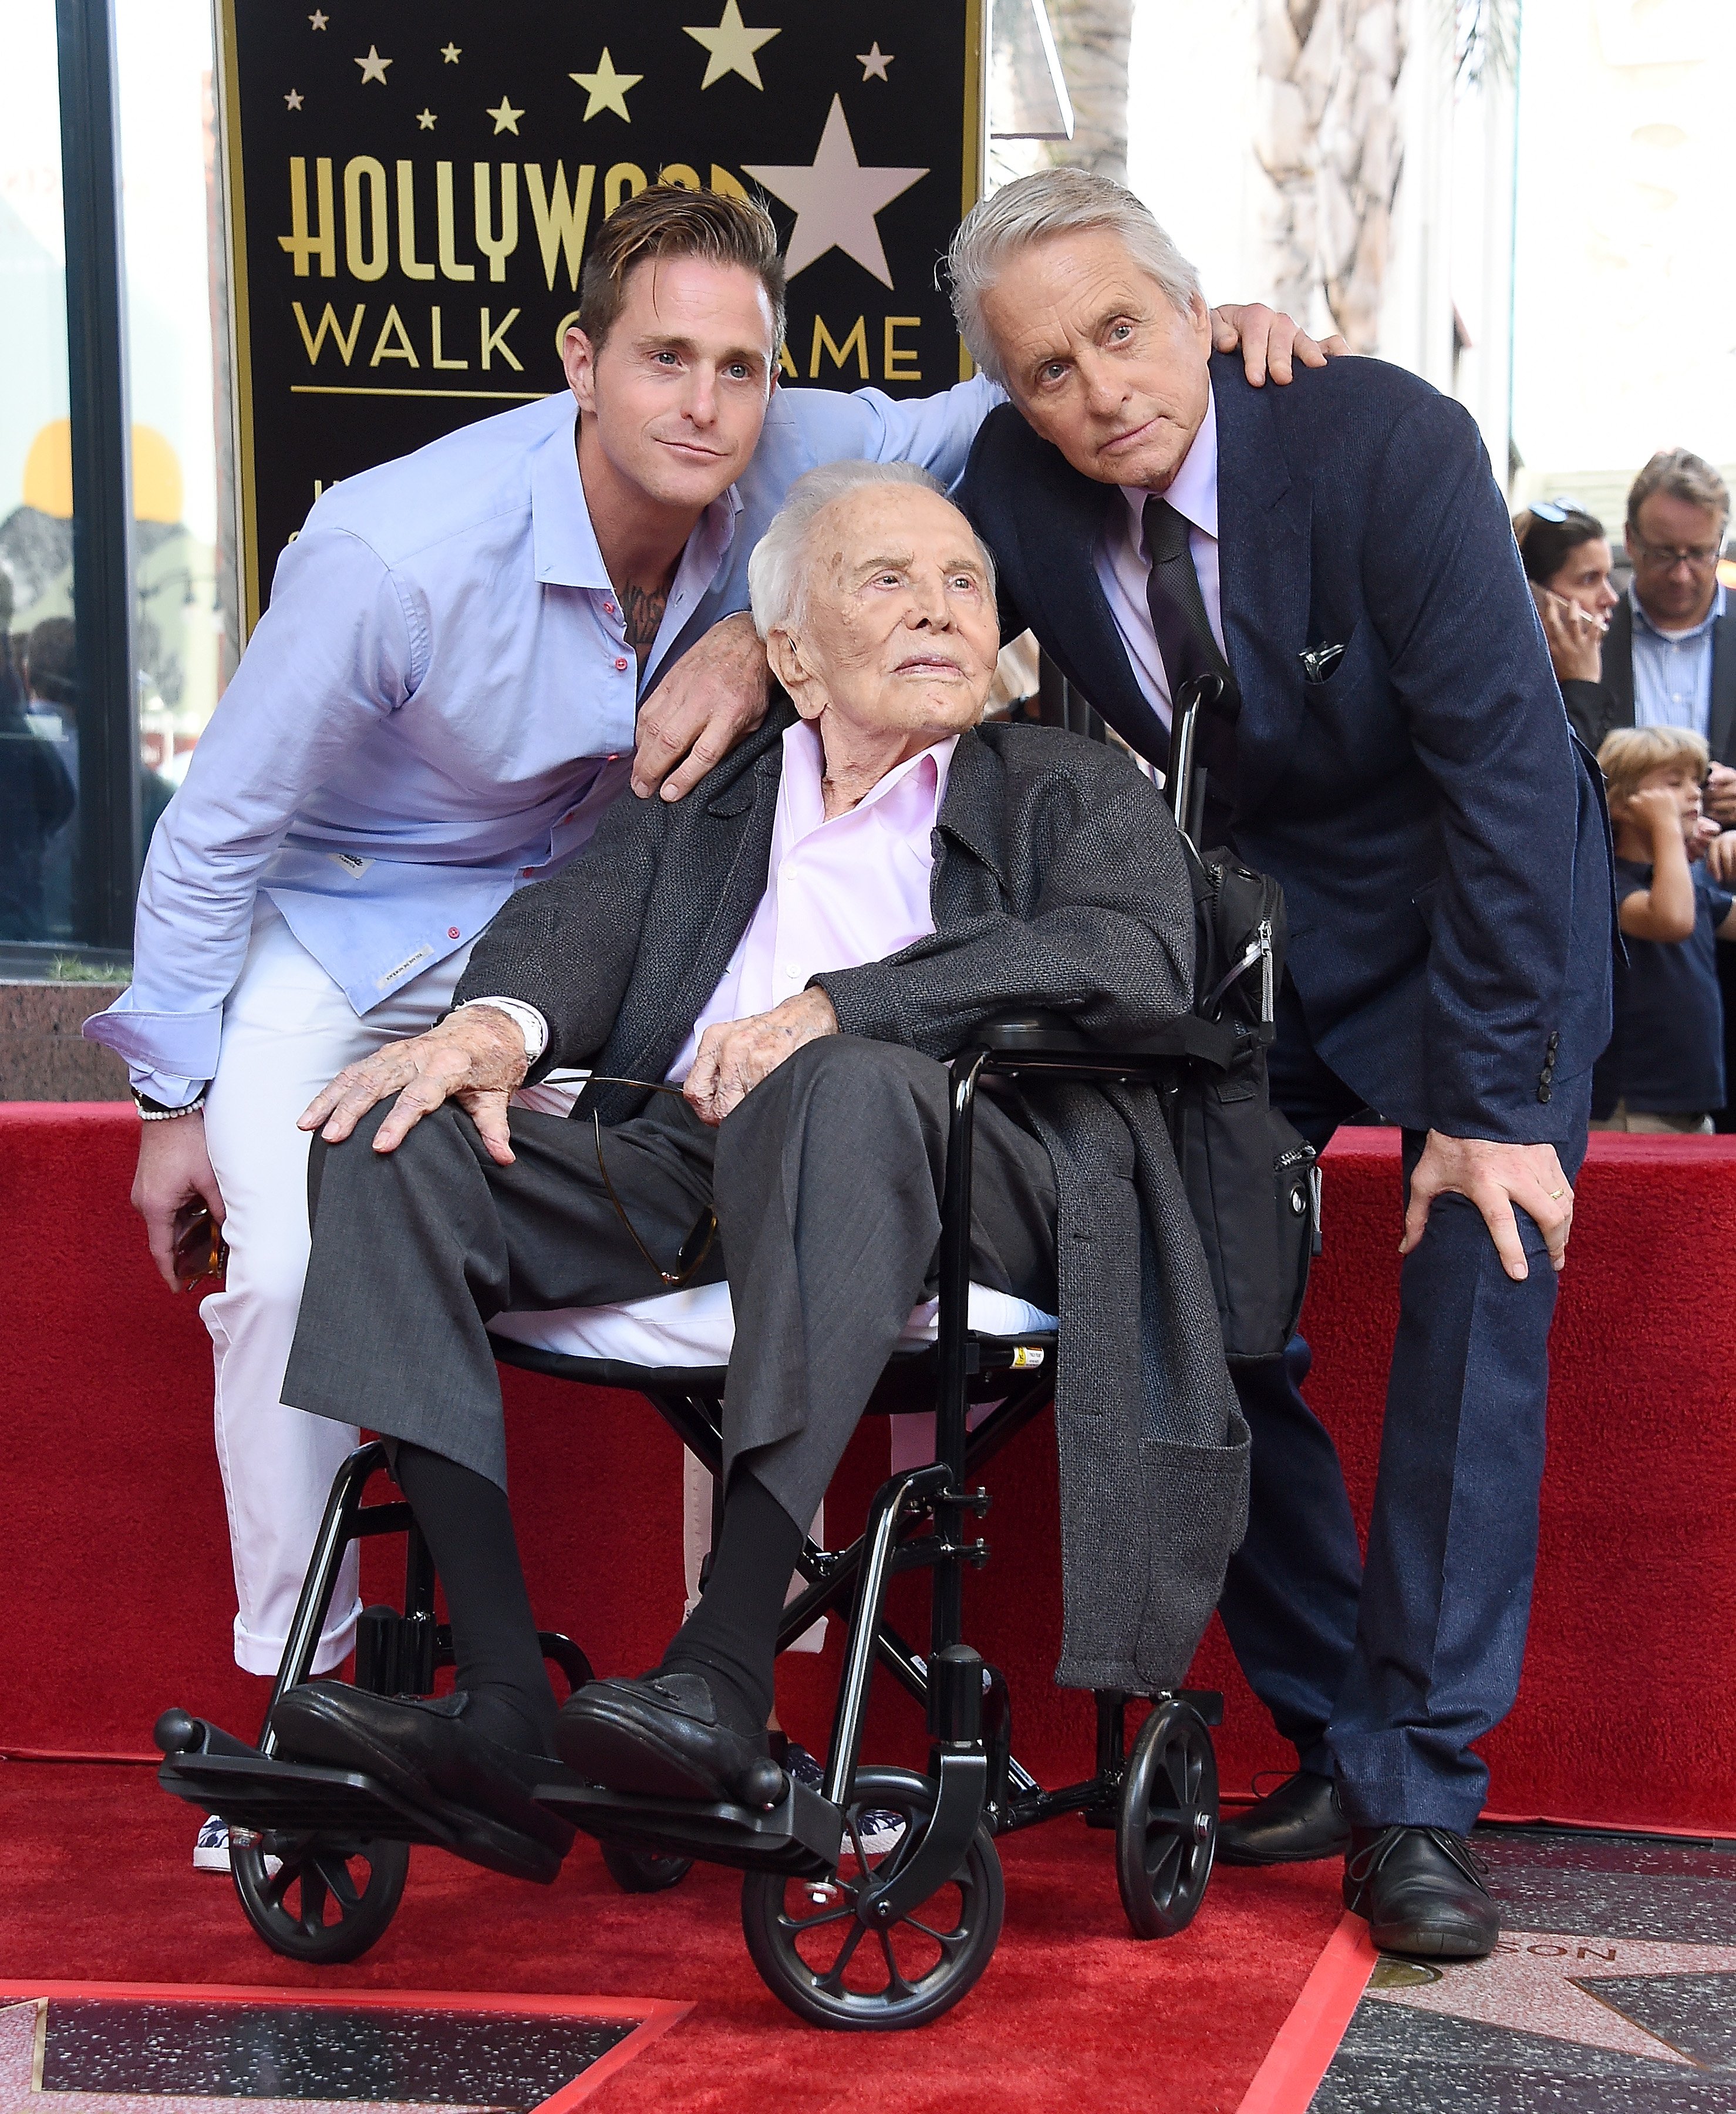 Cameron Douglas, Kirk Douglas, and Michael Douglas pose at the Michael Douglas Star On The Hollywood Walk Of Fame ceremony, 2018,Hollywood, California. | Photo: Getty Images